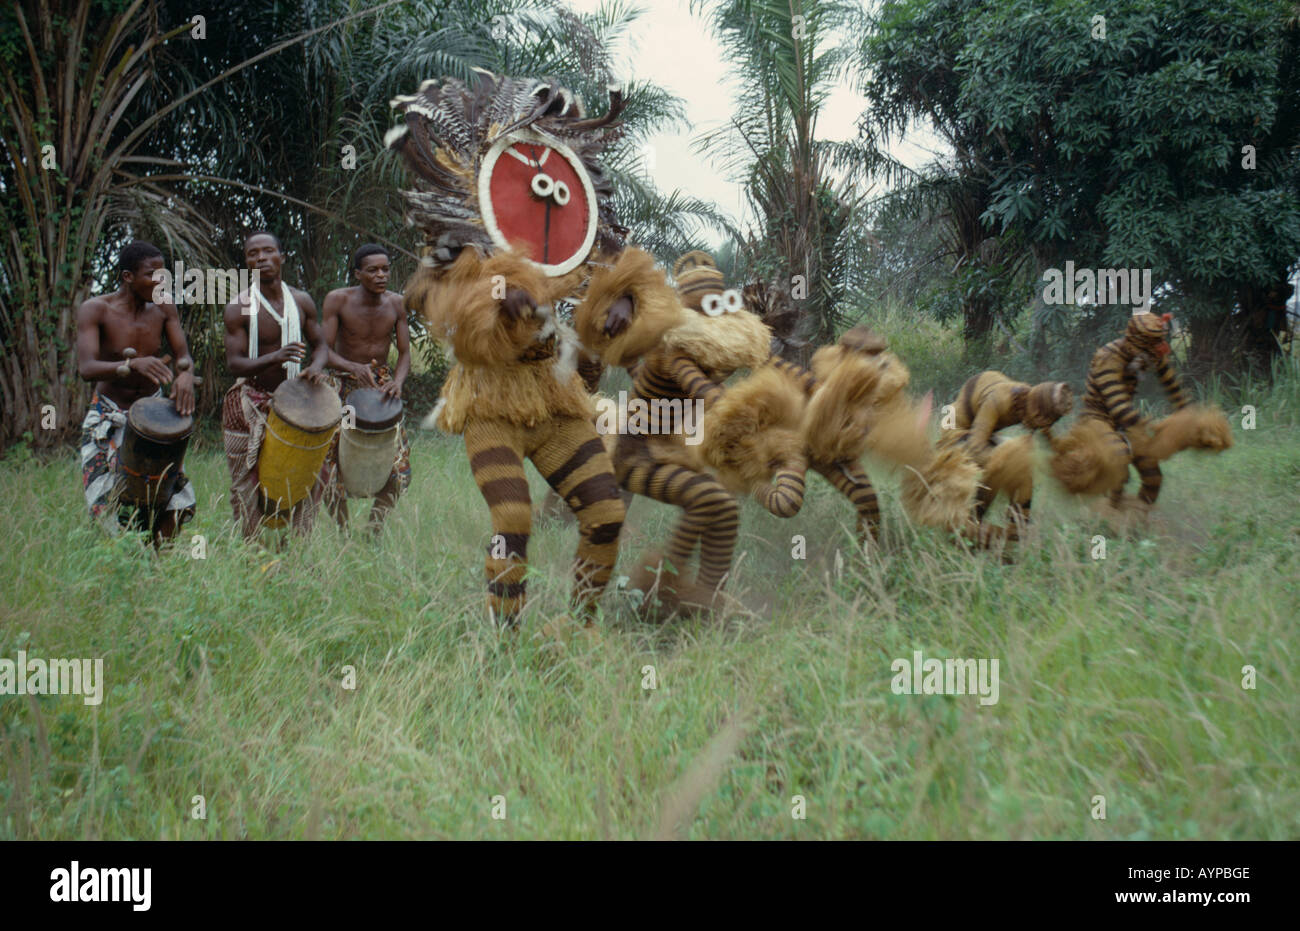 CONGO Central Africa Dance Bapende tribe animal masqueraders performing dance at initiation ceremony Stock Photo